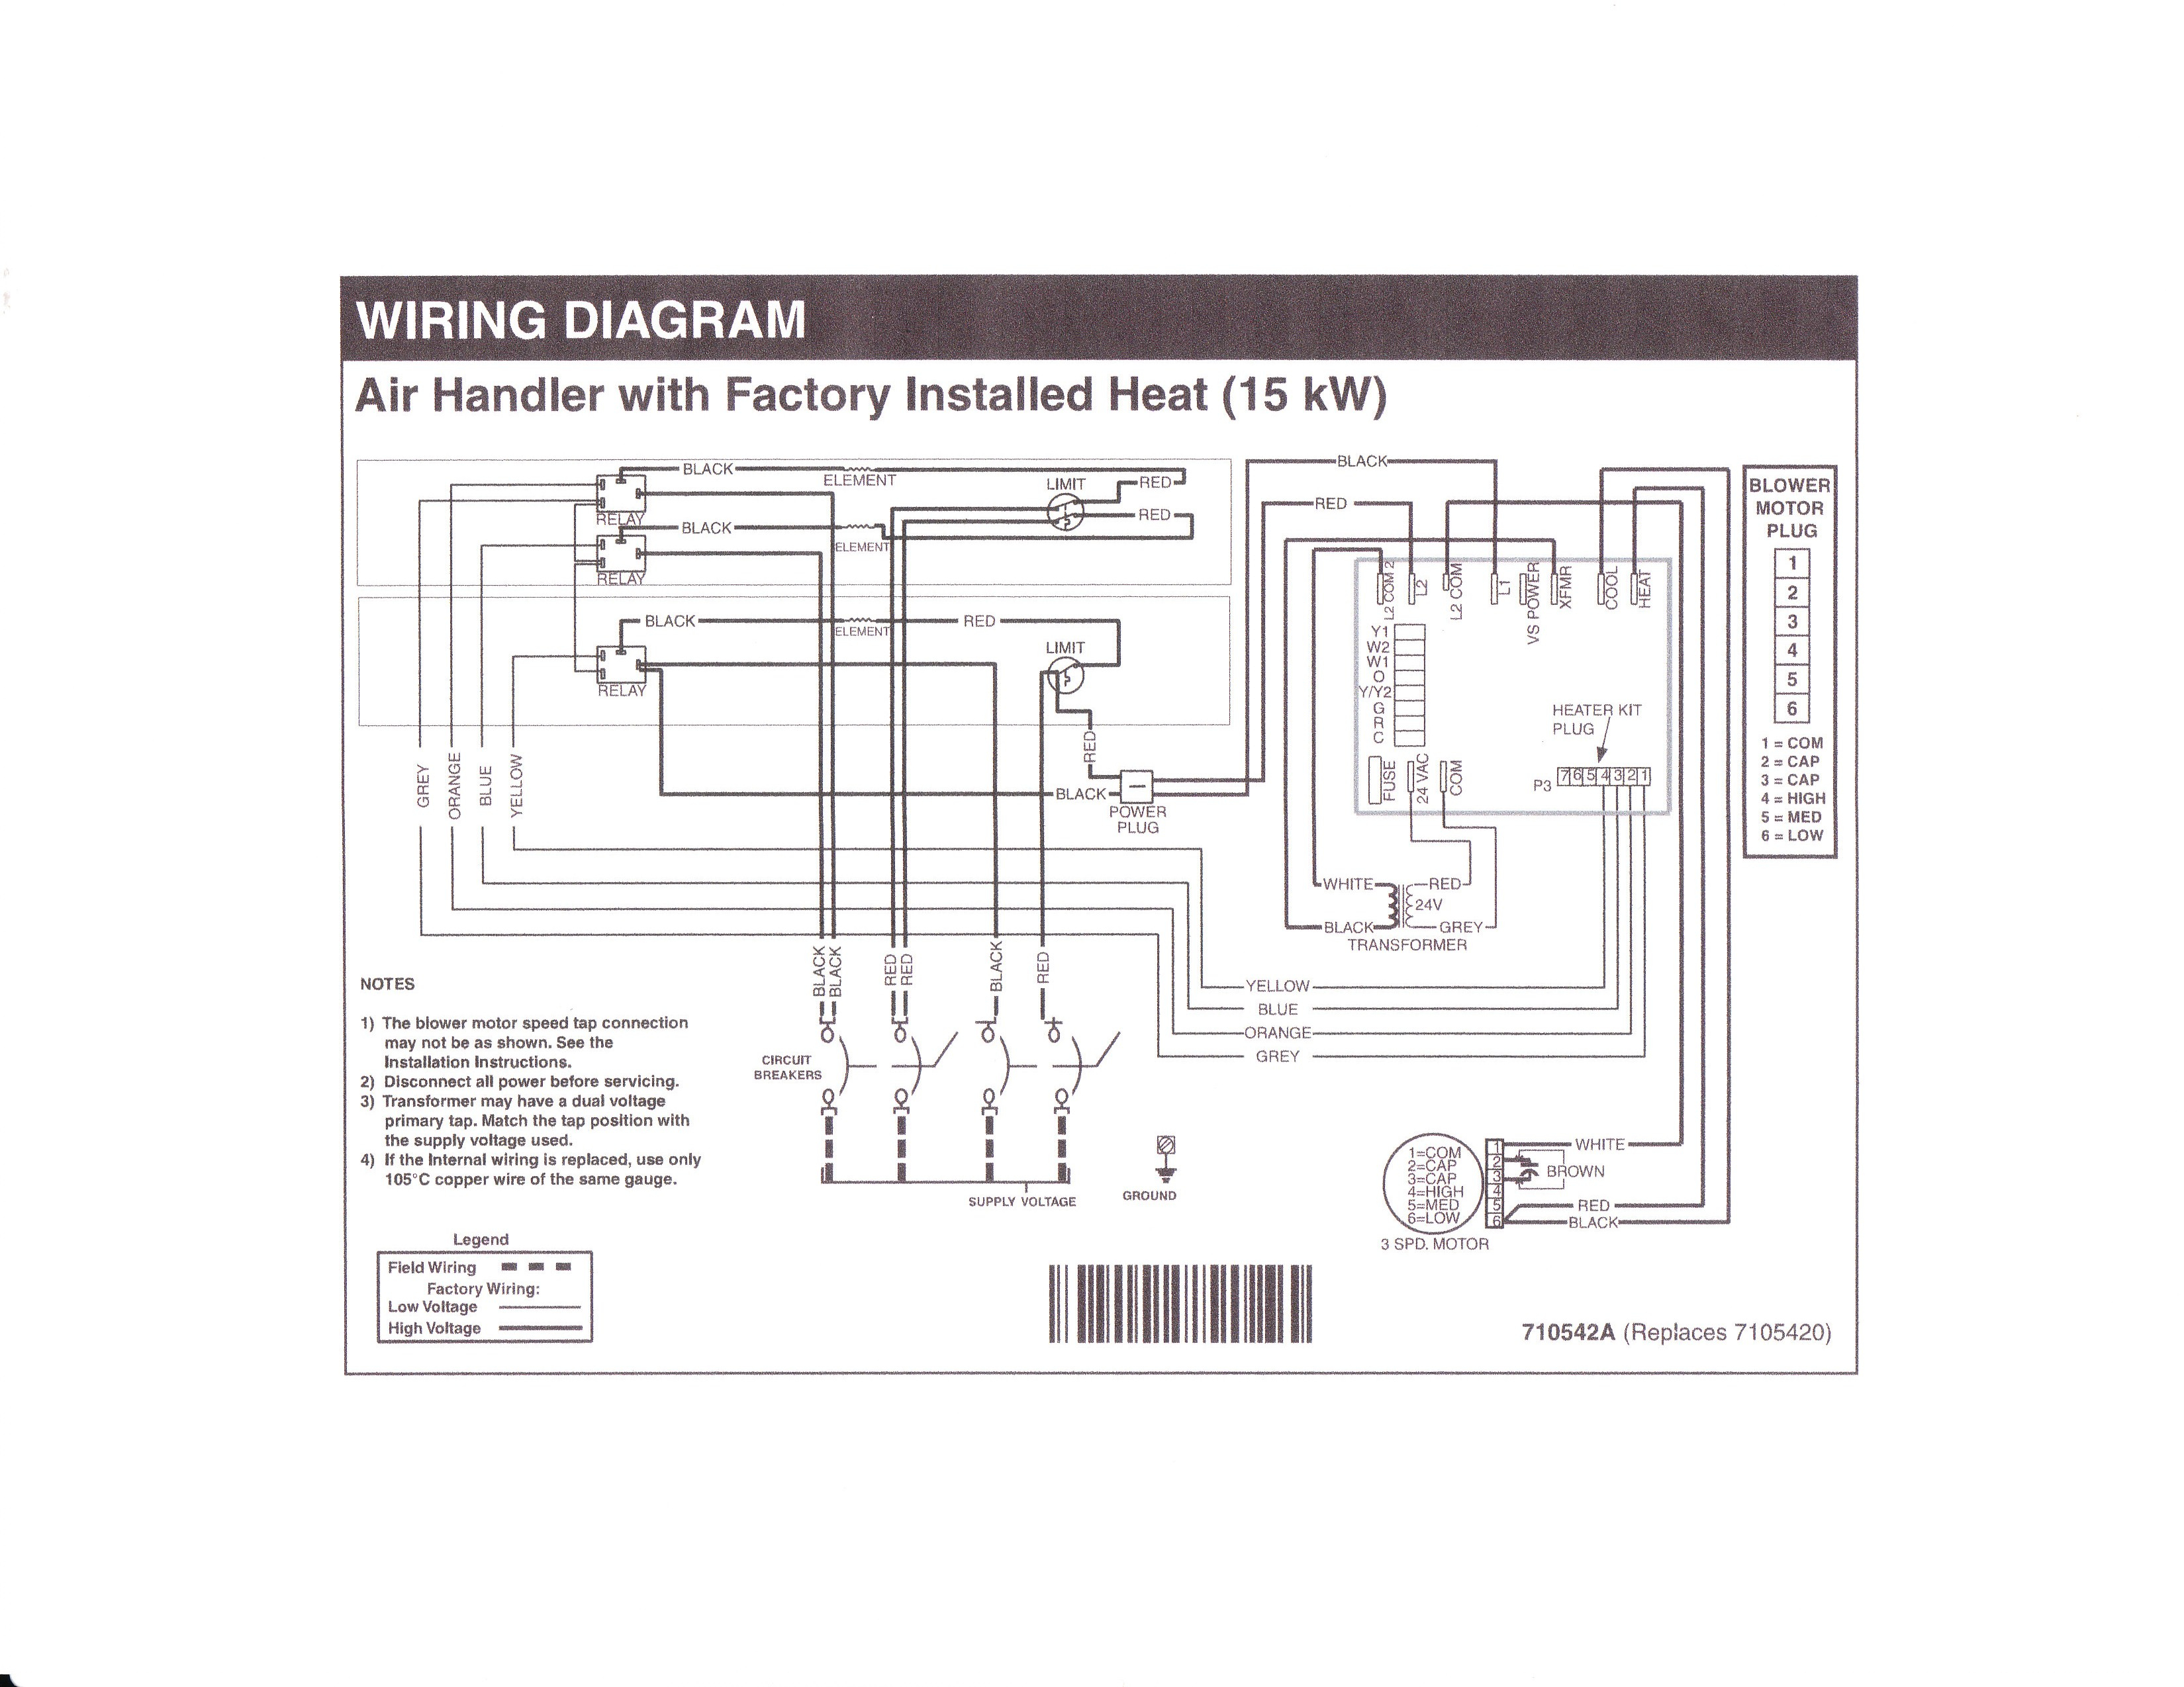 Mobile Home Intertherm Furnace Wiring Diagram - Wiring Diagram Explained - Wiring Diagram For Mobile Home Furnace